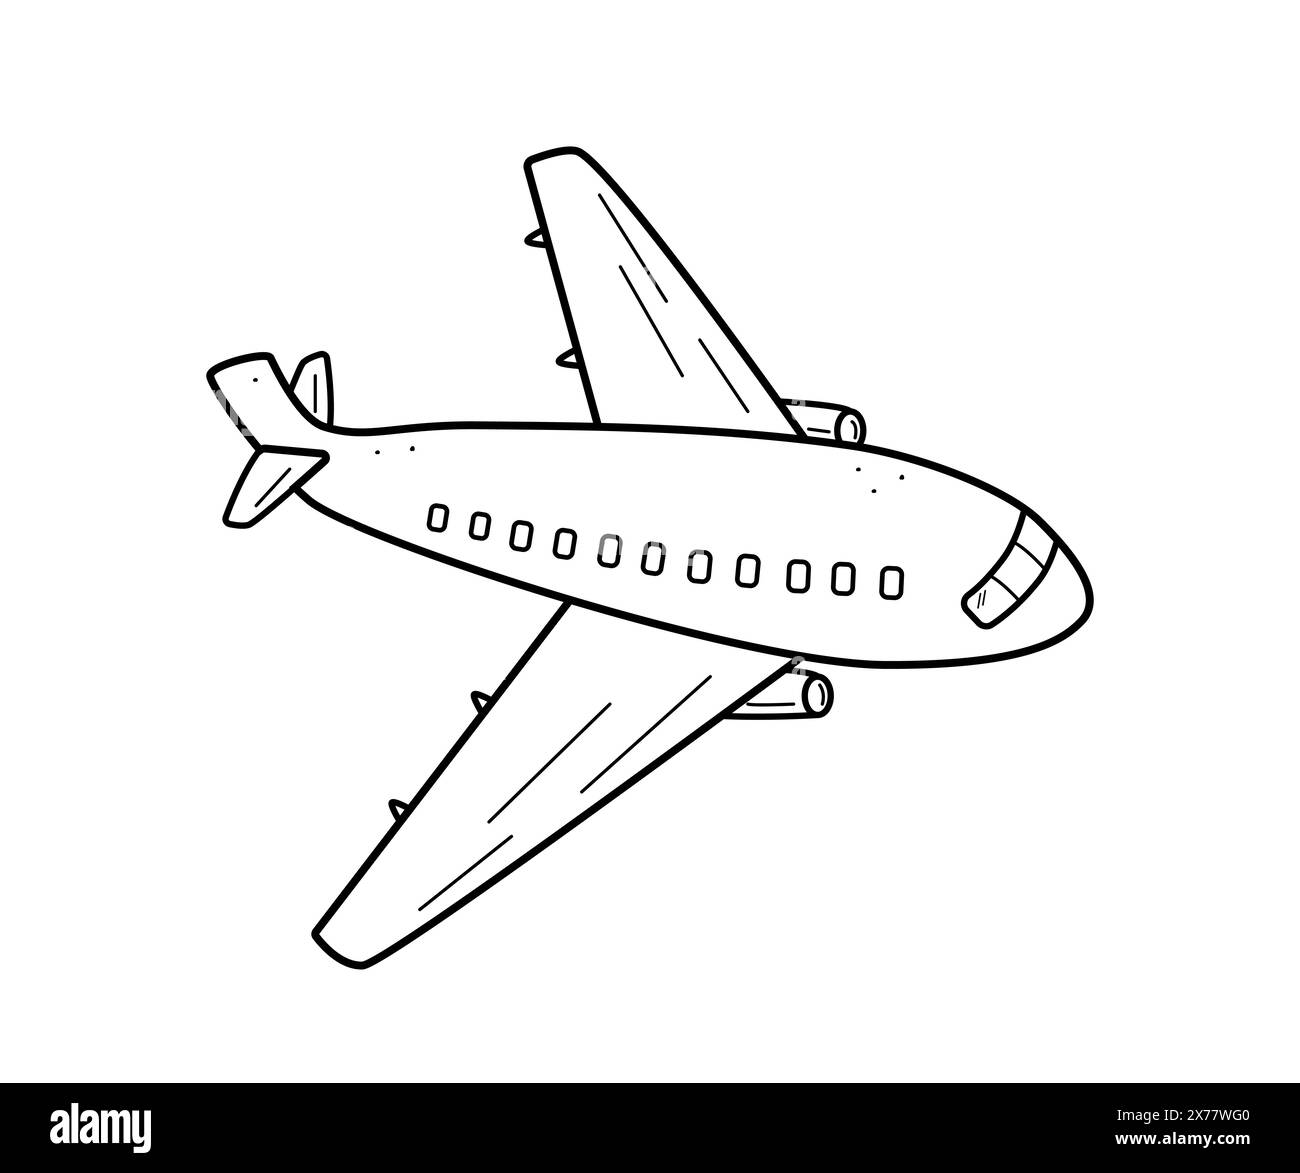 Passenger plane in flight doodle icon. Vector illustration of an air transport isolated on a white single. Stock Photo